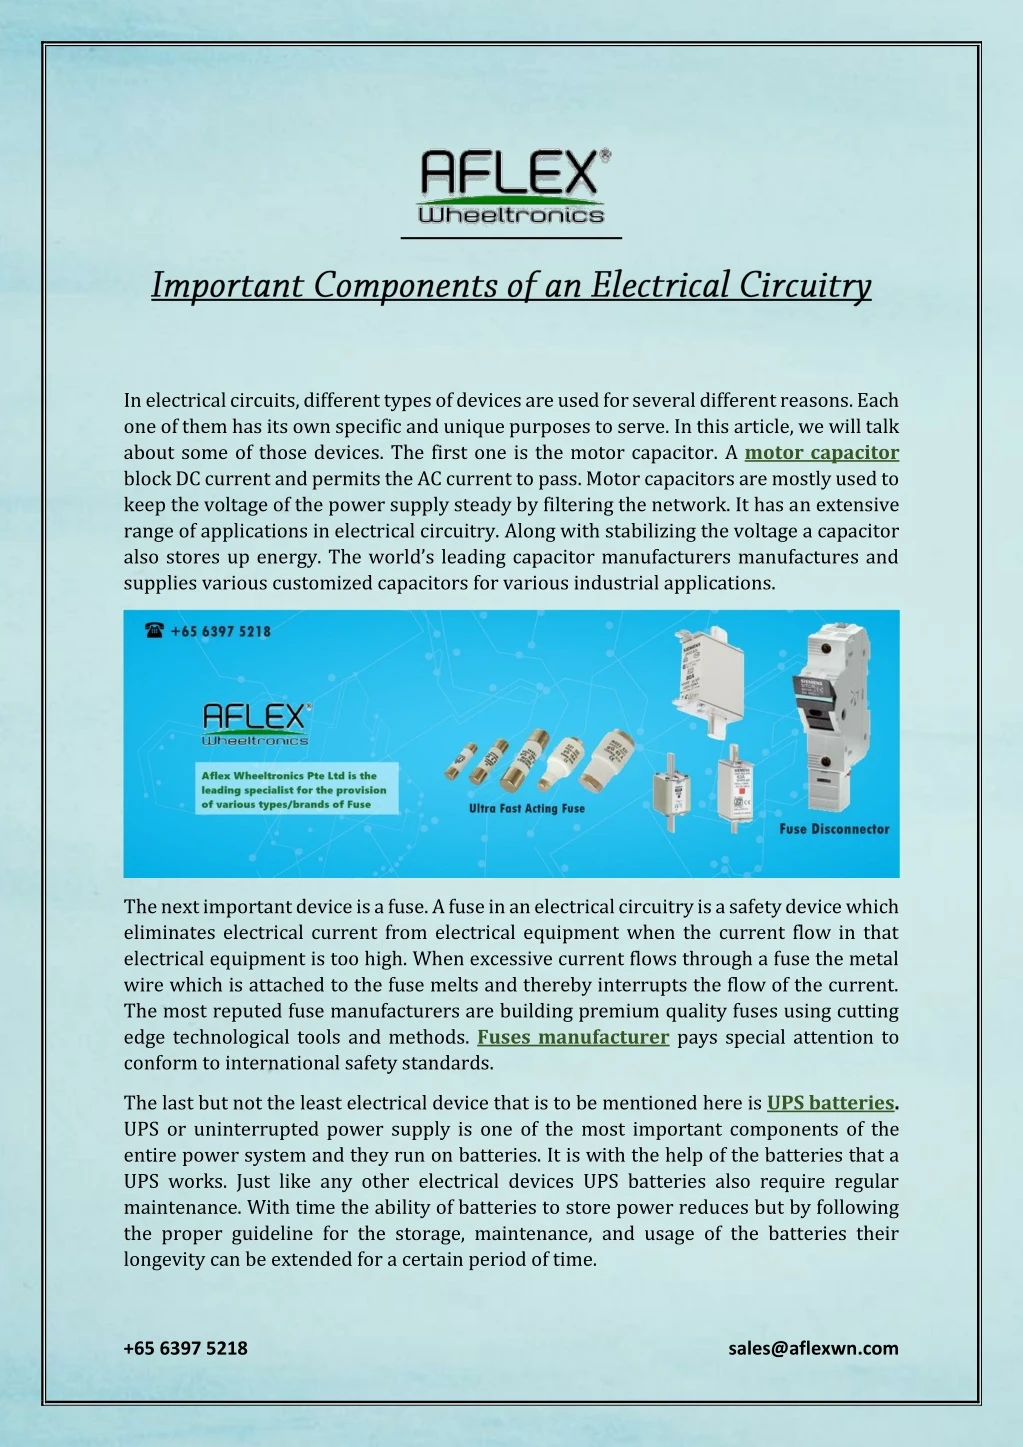 in electrical circuits different types of devices